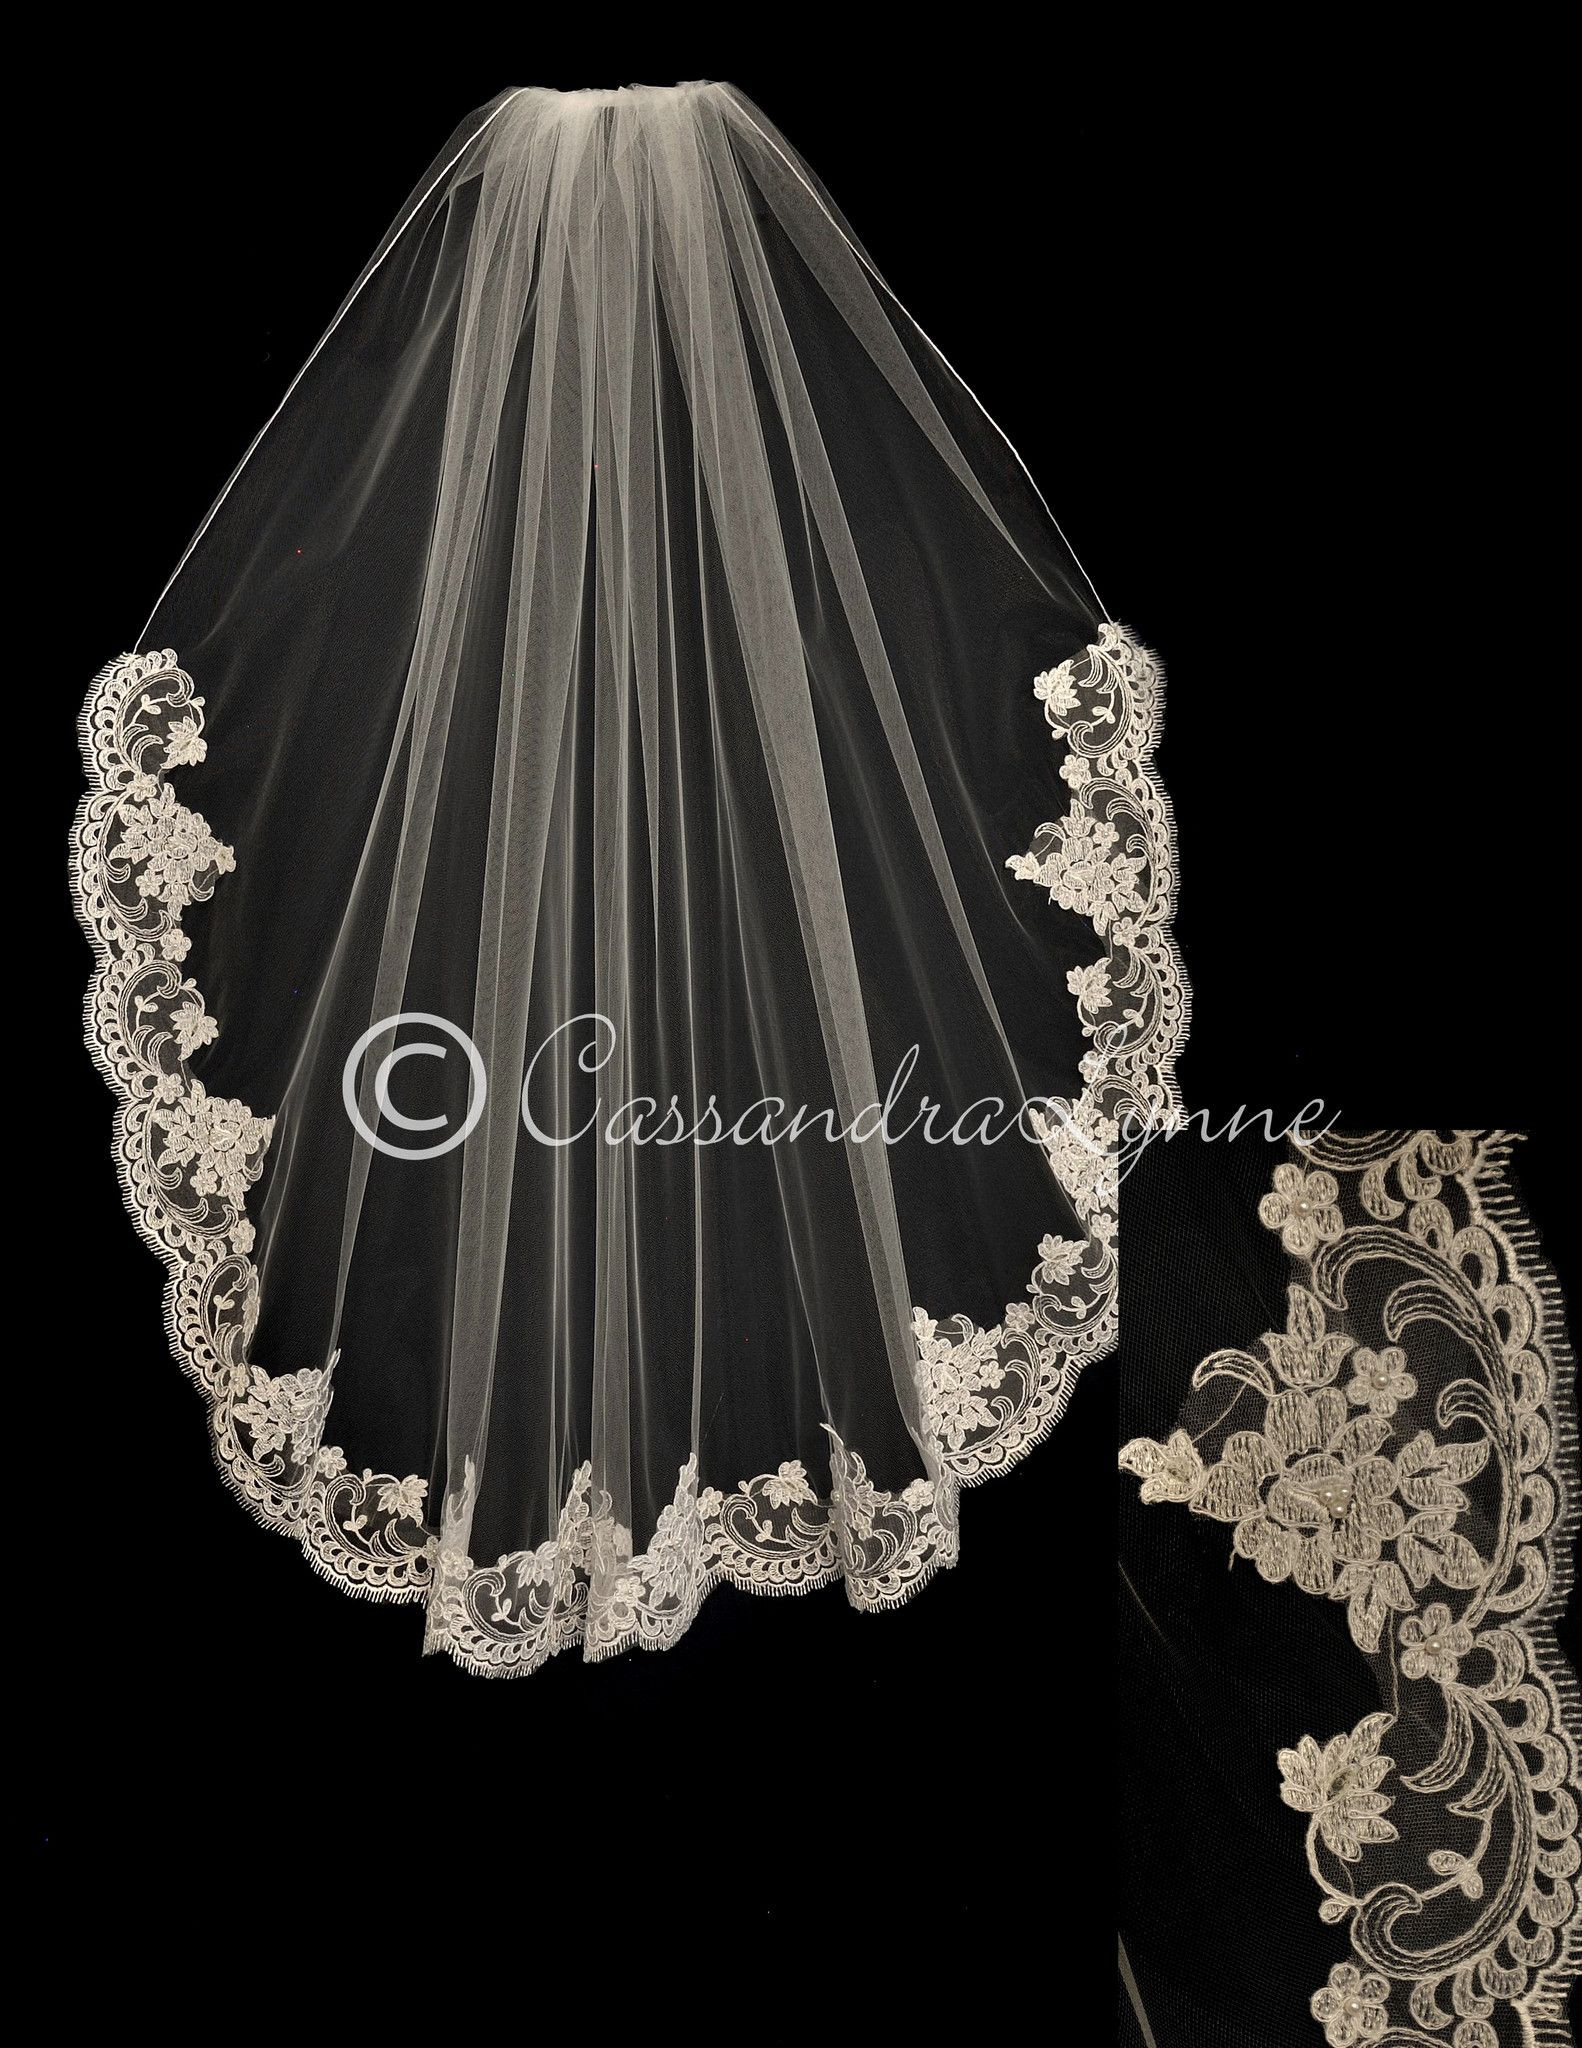 Lace And Pearl Wedding Veils
 Bridal Veil with Pearl Beaded Flower Lace in 2019